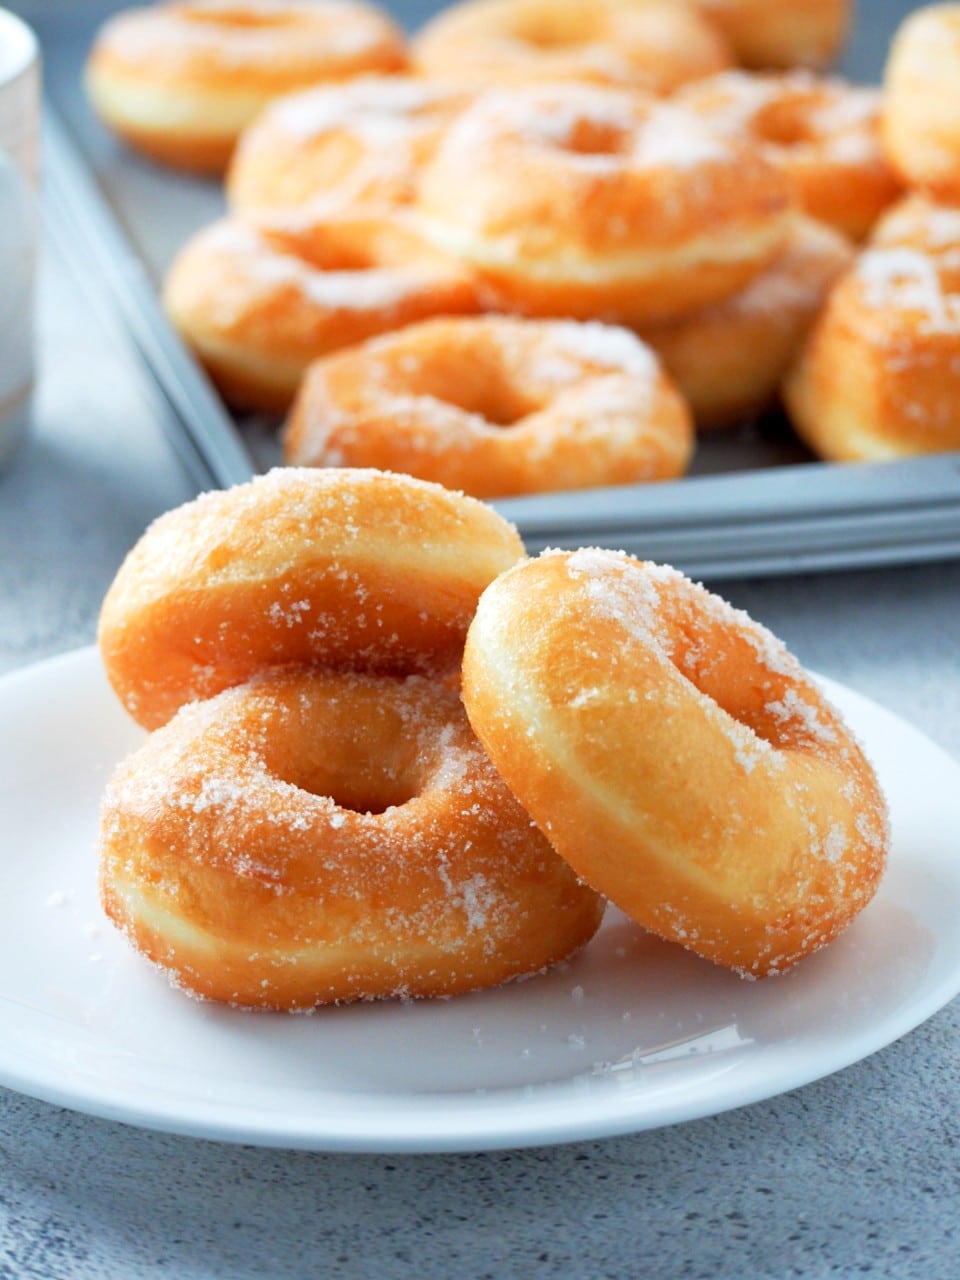 Donuts rolled in sugar on a serving plate.